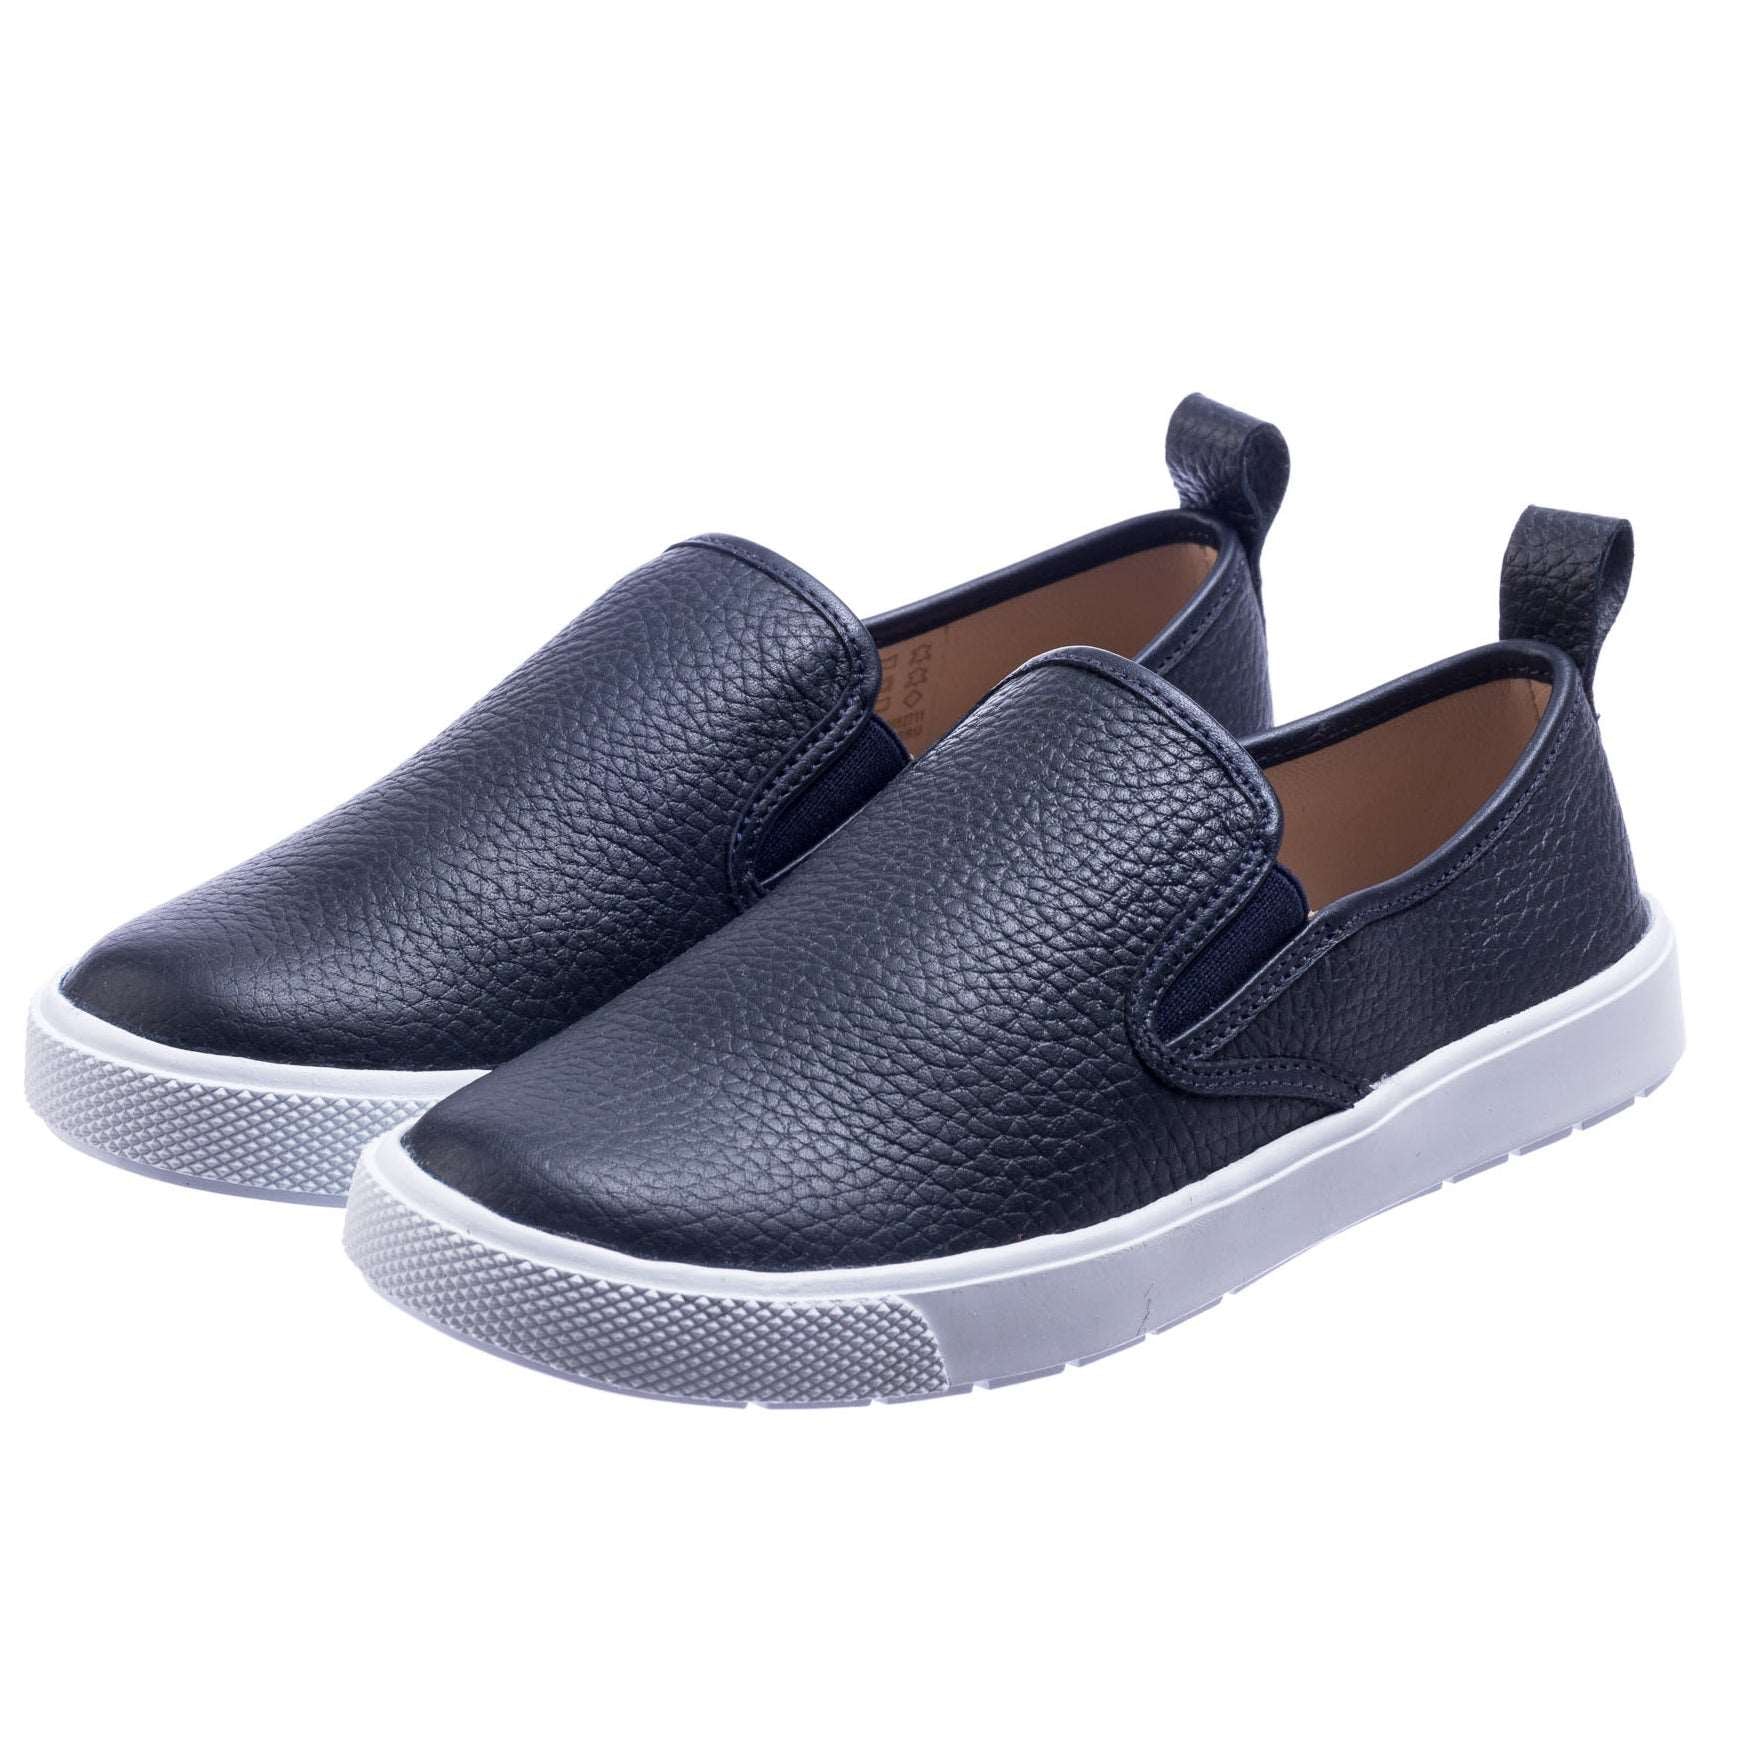 Black Slip-on Sneakers Outfits For Men (412 ideas & outfits)